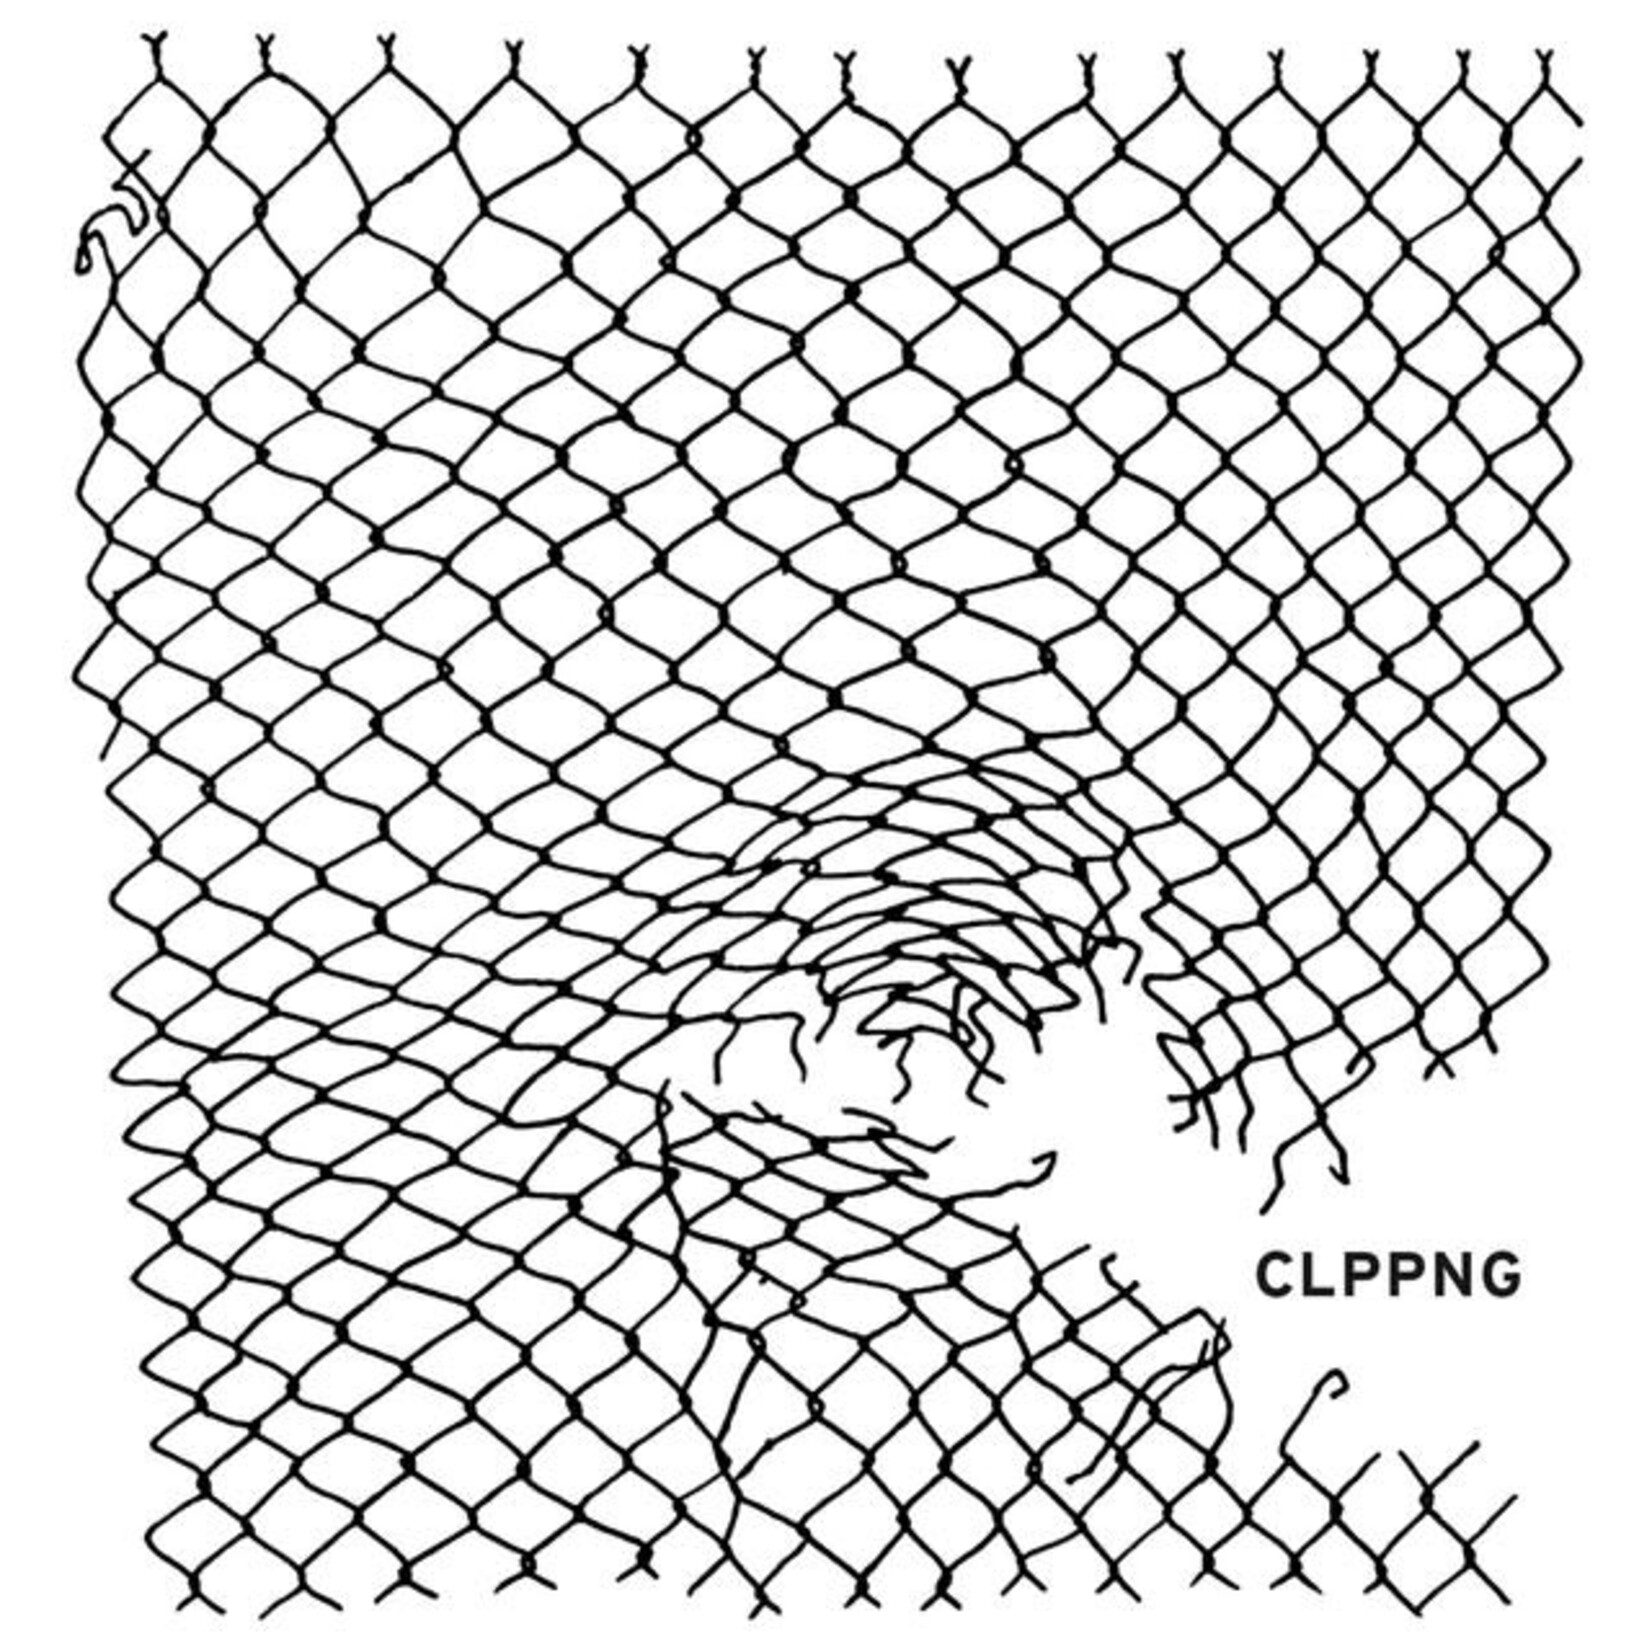 Clipping - CLPPNG [CD]